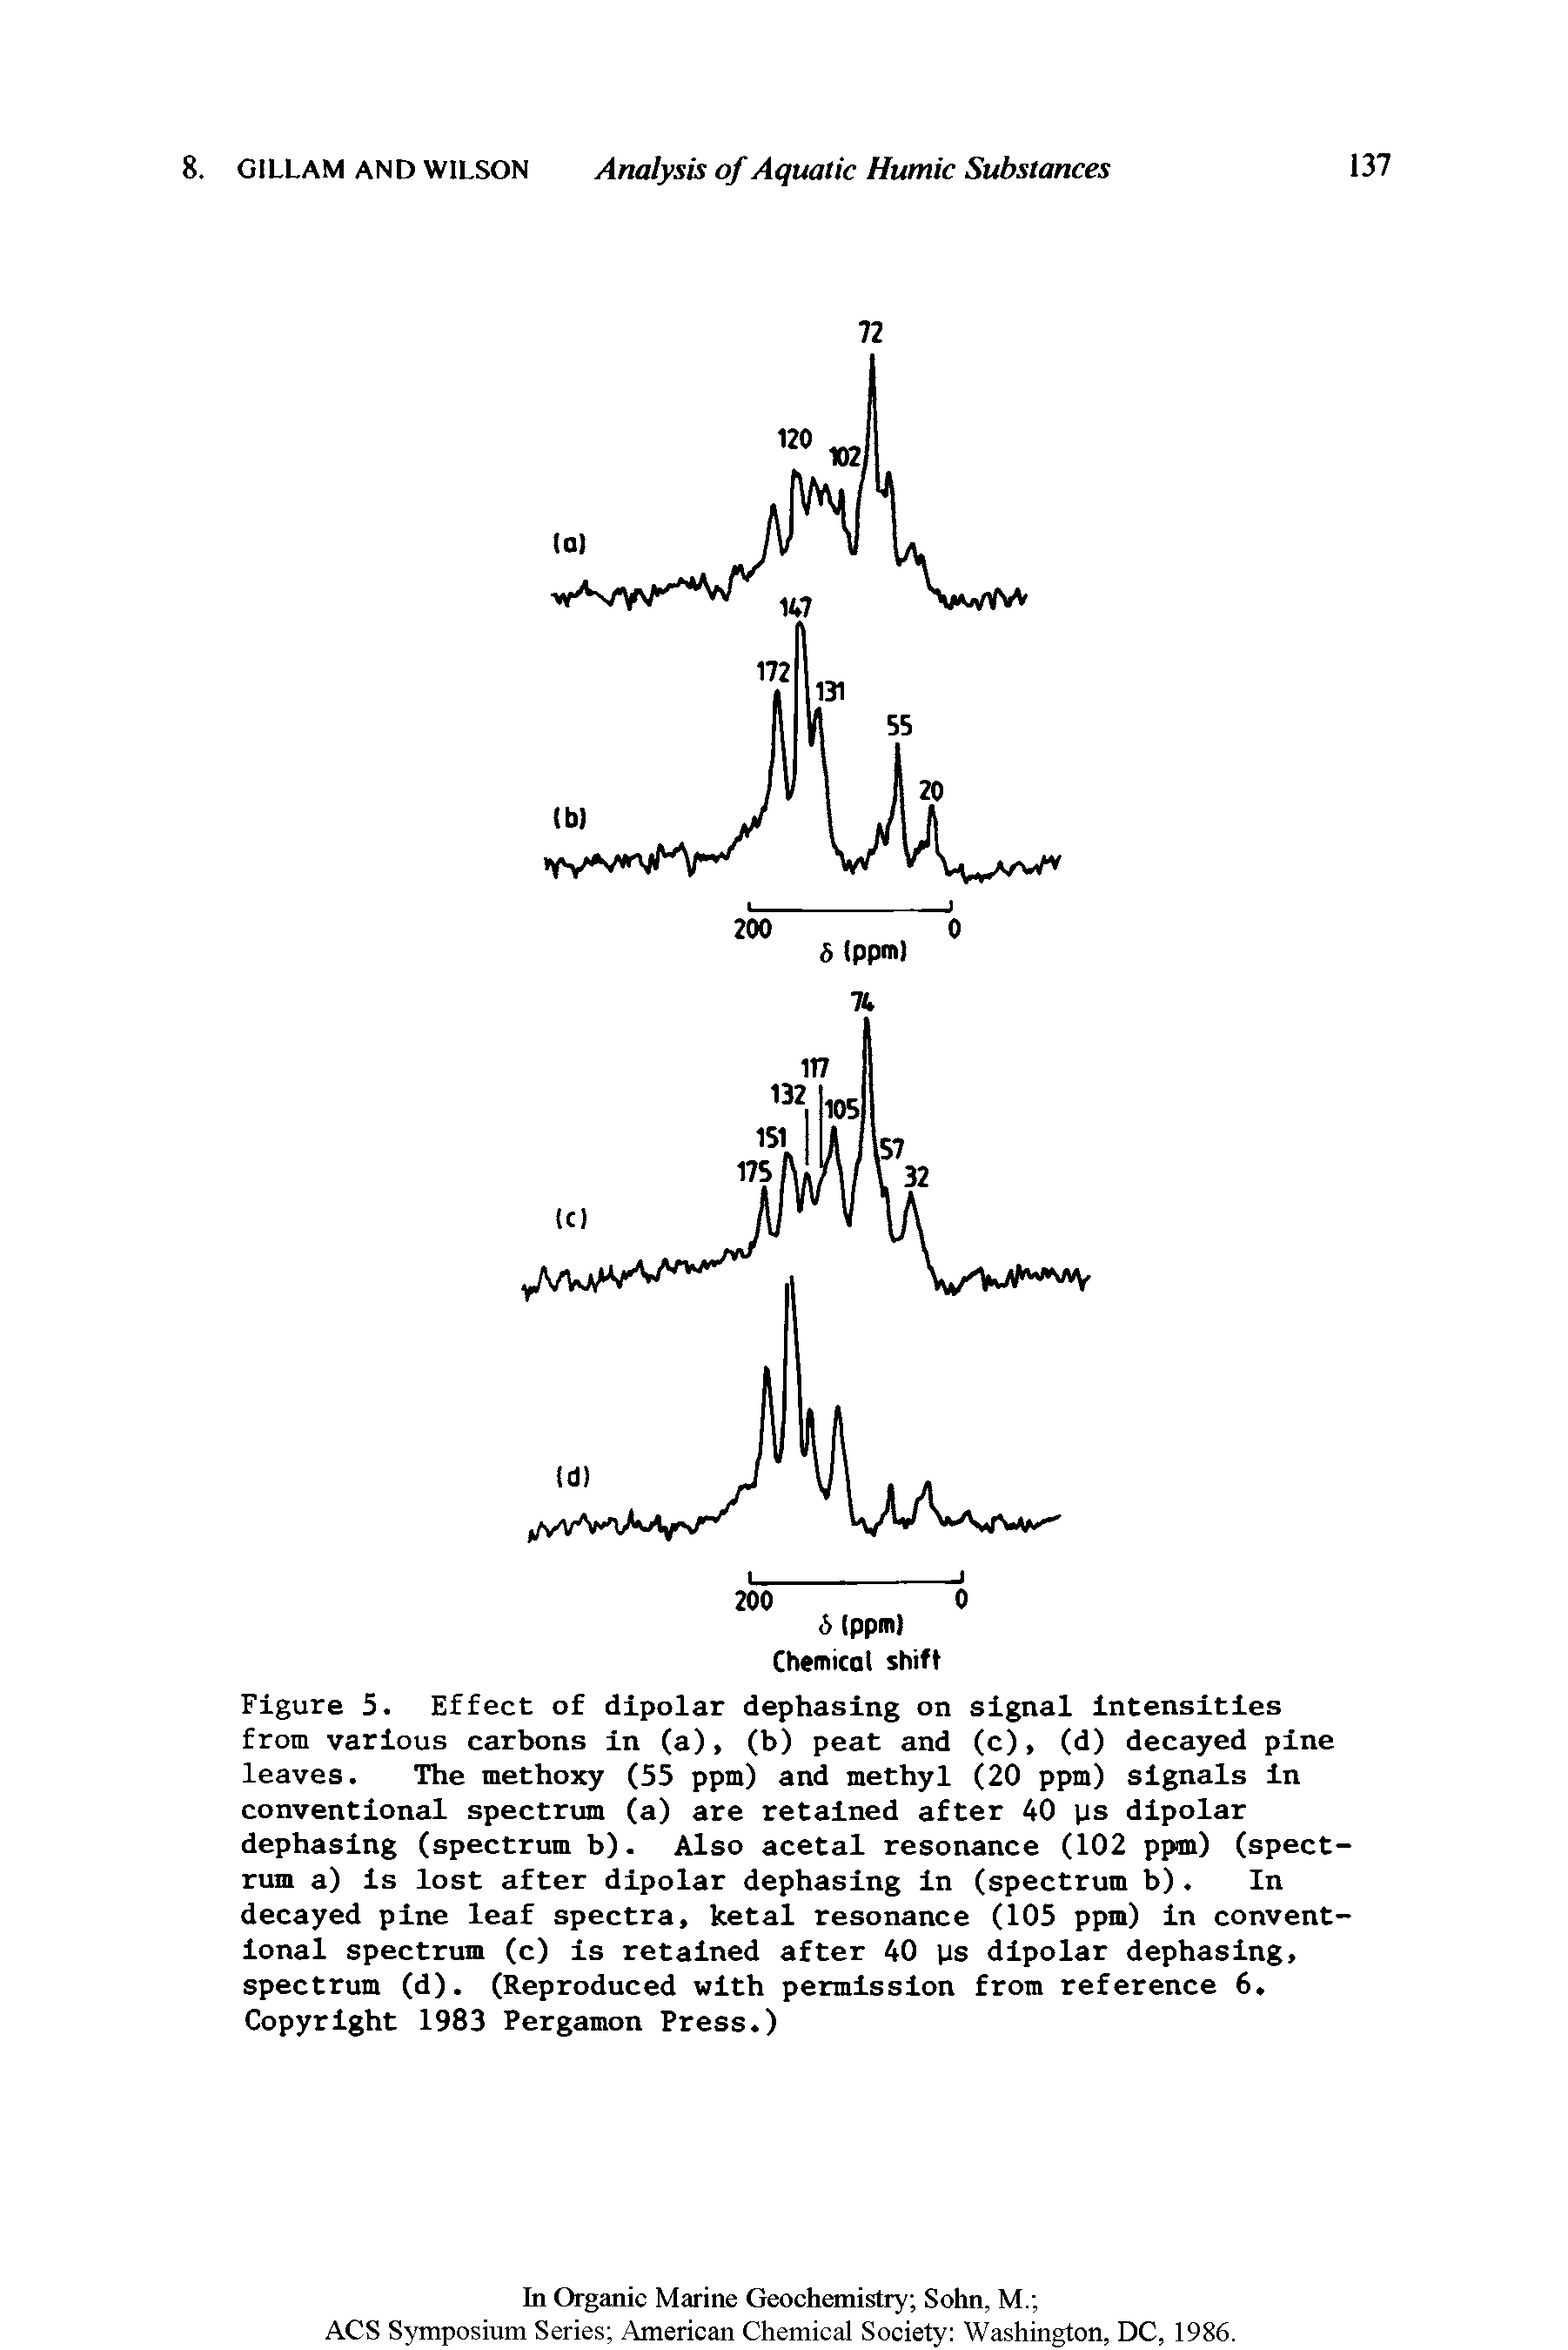 Figure 5. Effect of dipolar dephaslng on signal Intensities from various carbons in (a), (b) peat and (c), (d) decayed pine leaves. The methoxy (55 ppm) and methyl (20 ppm) signals in conventional spectrum (a) are retained after 40 ps dipolar dephasing (spectrum b). Also acetal resonance (102 ppm) (spectrum a) is lost after dipolar dephasing in (spectrum b). In decayed pine leaf spectra, ketal resonance (105 ppm) in conventional spectrum (c) is retained after 40 ps dipolar dephasing, spectrum (d). (Reproduced with permission from reference 6. Copyright 1983 Pergamon Press.)...